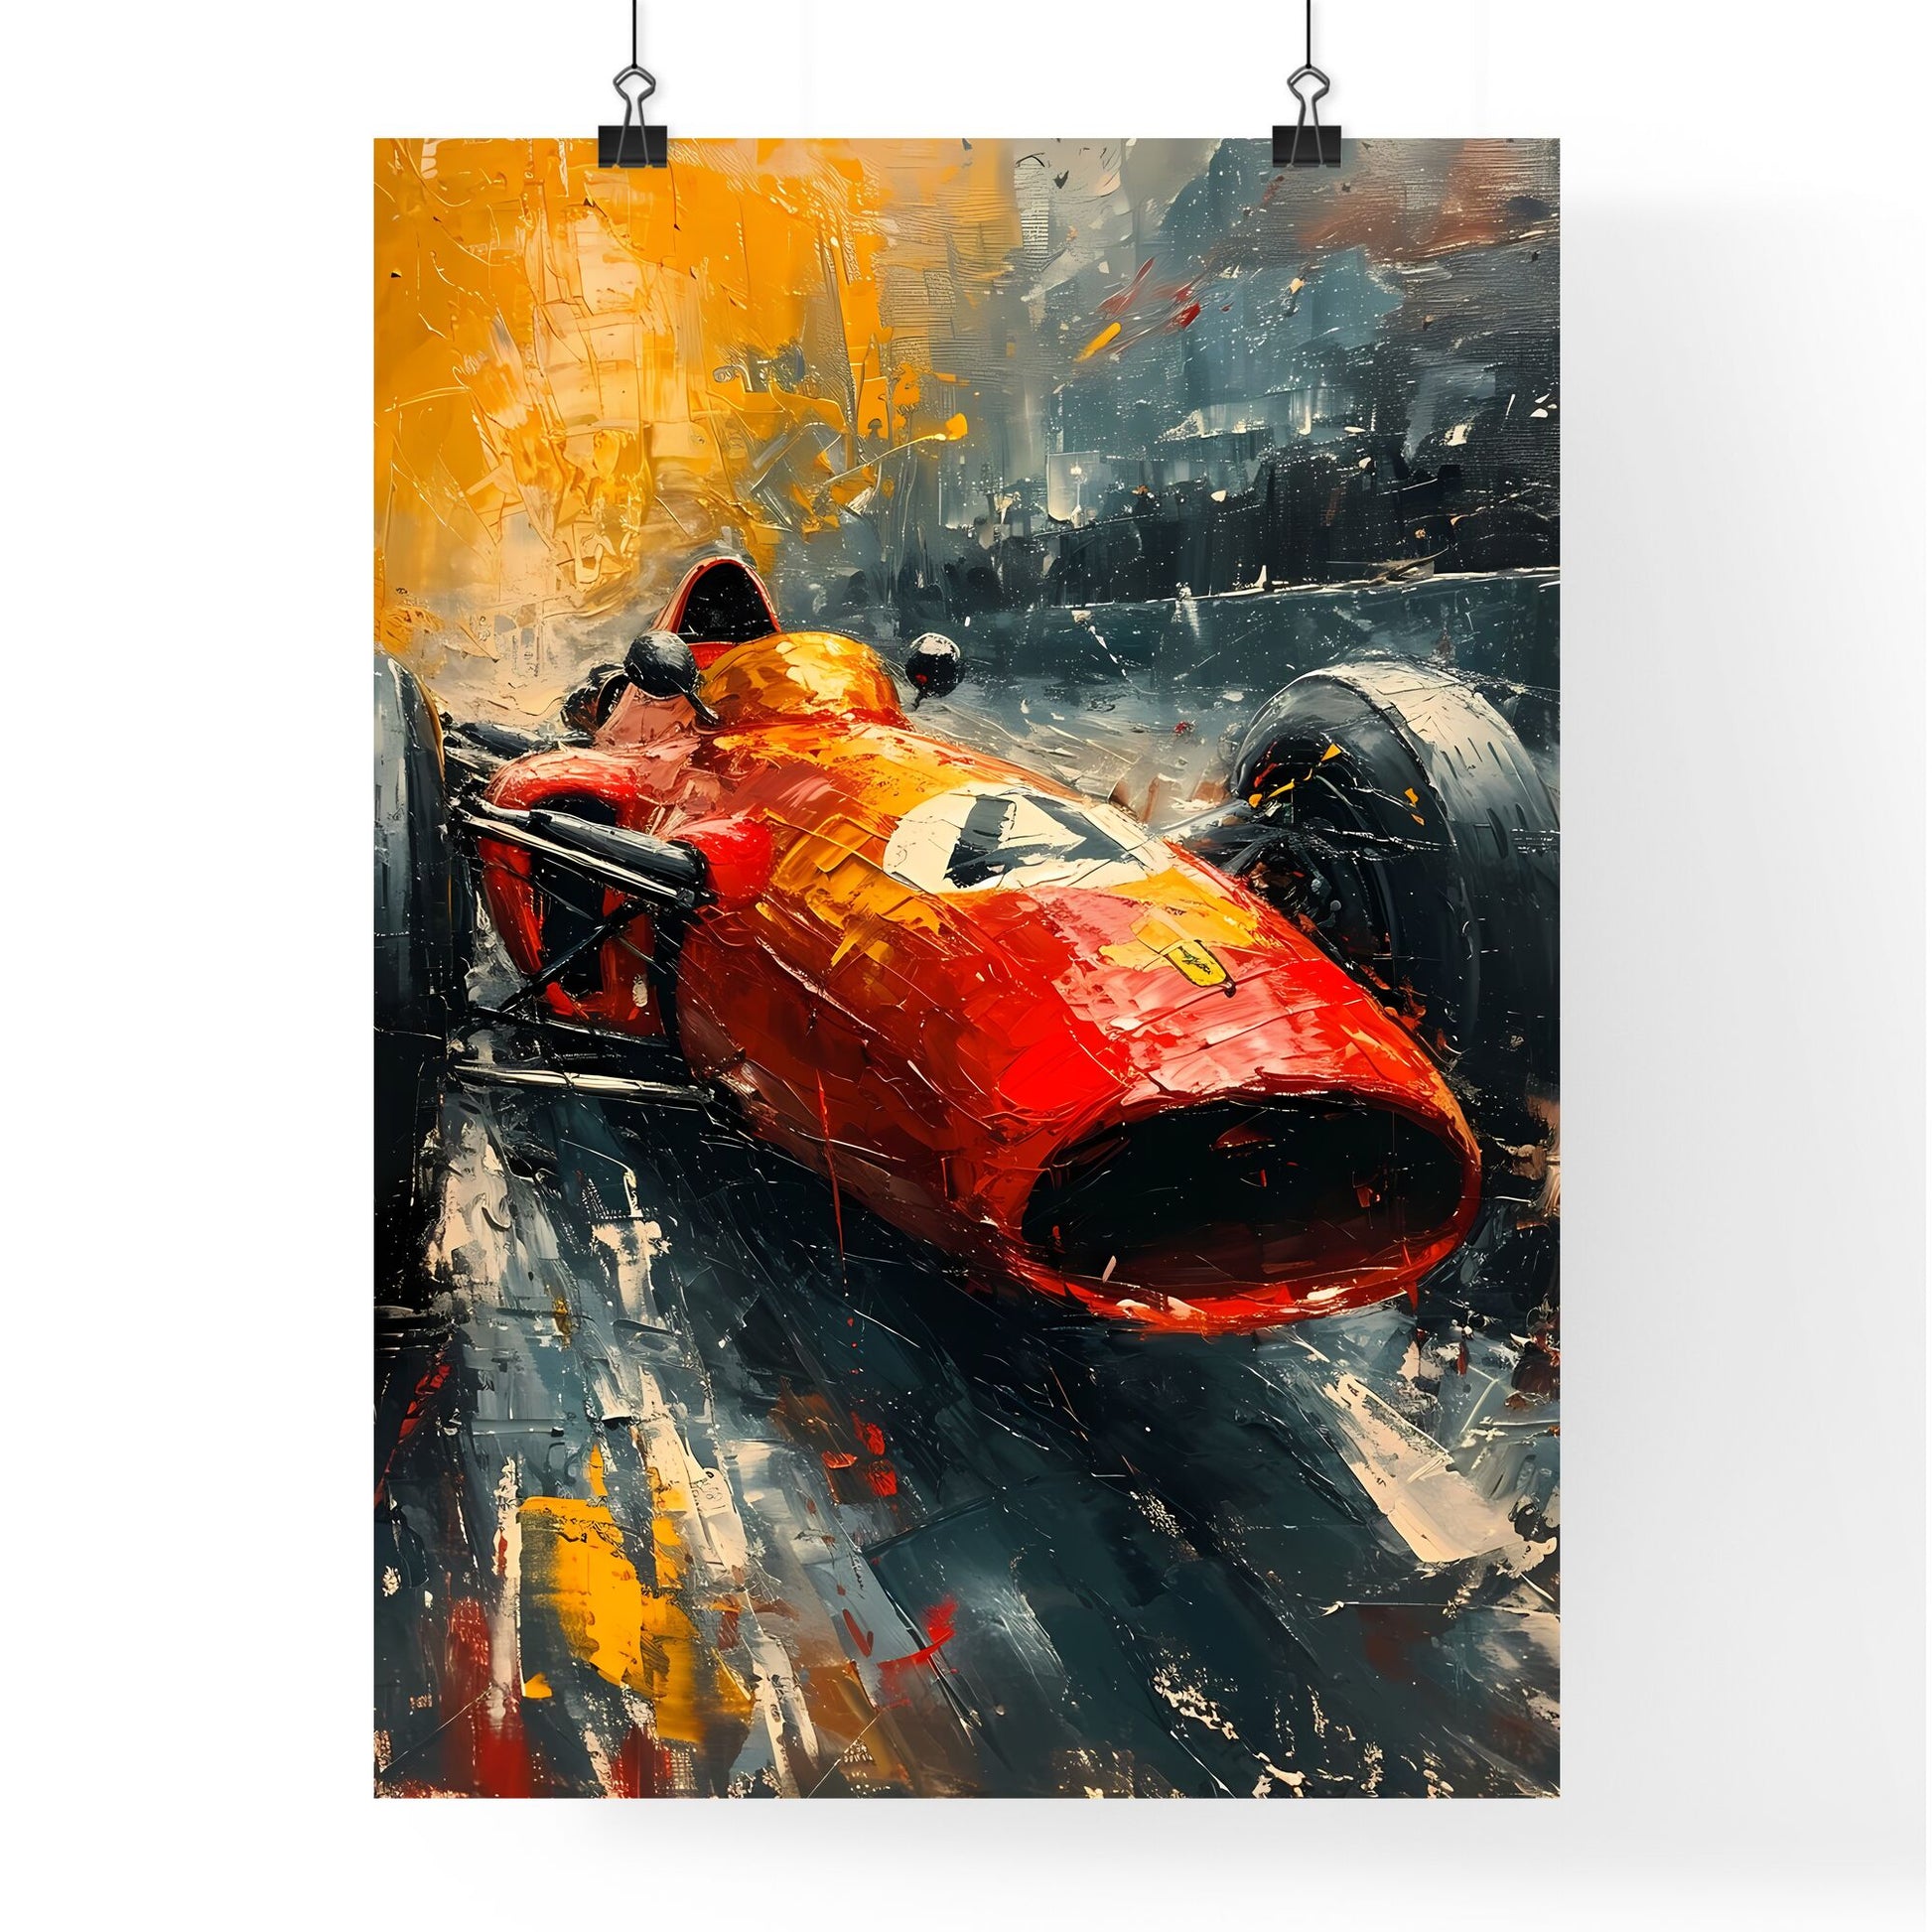 A Poster of Formula One style race car - A Painting Of A Red Race Car Default Title